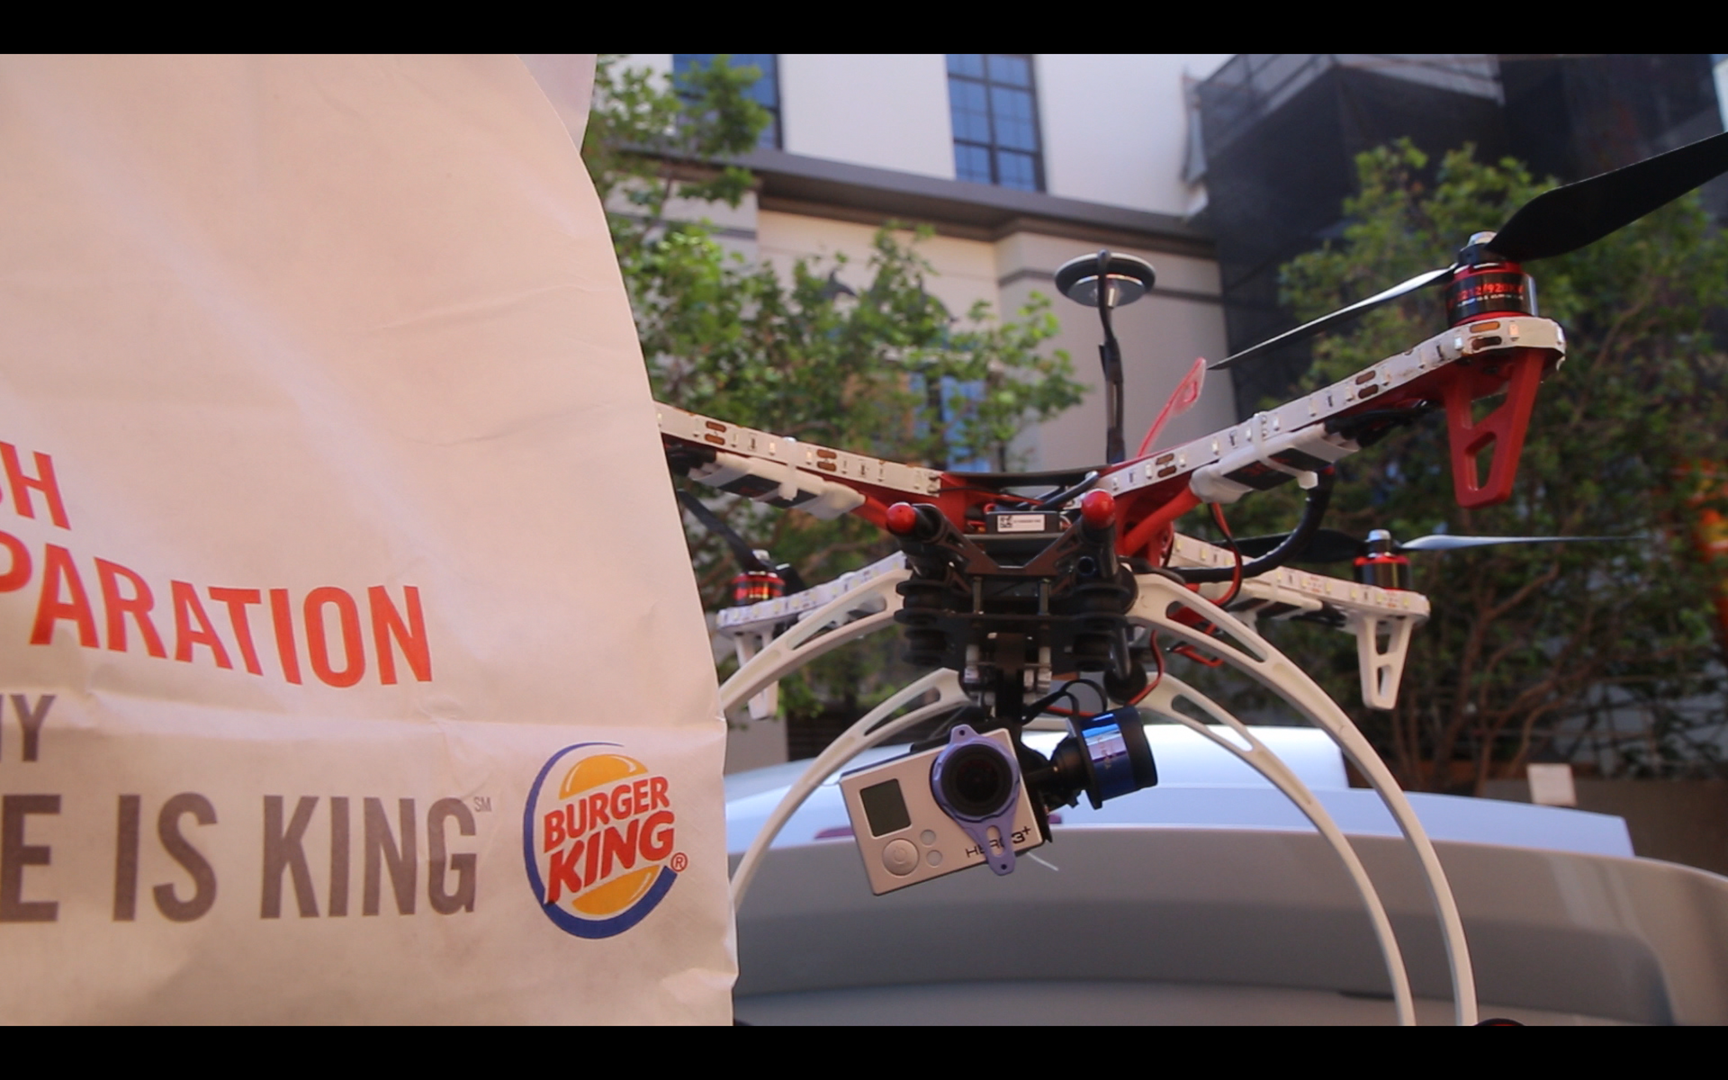 Why Did A Drone In San Francisco Drop Burgers On The Homeless?